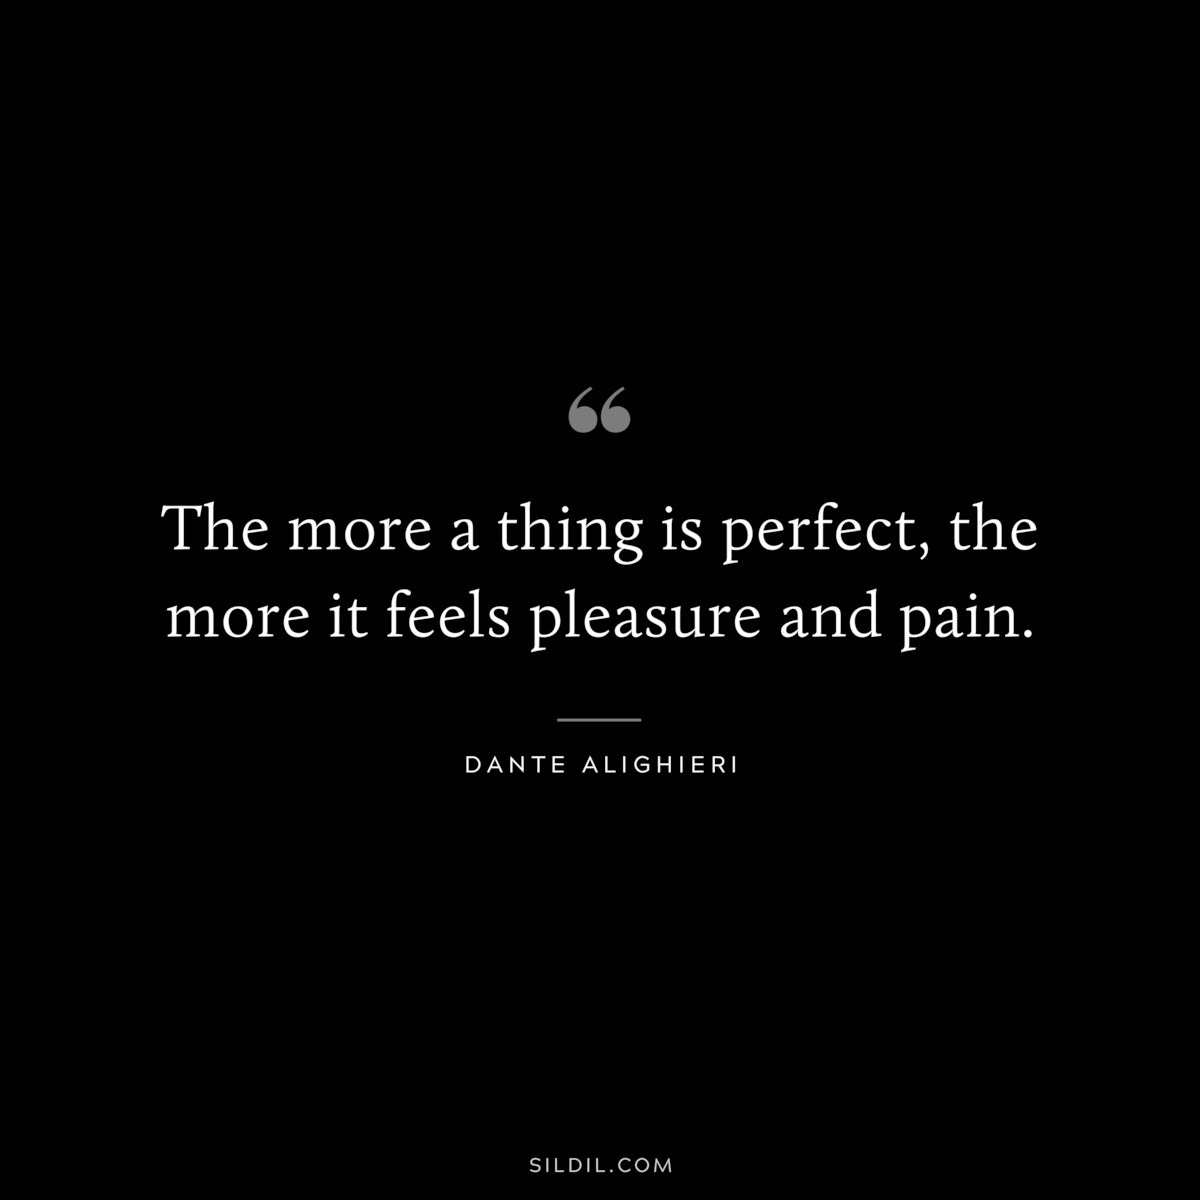 The more a thing is perfect, the more it feels pleasure and pain. ― Dante Alighieri